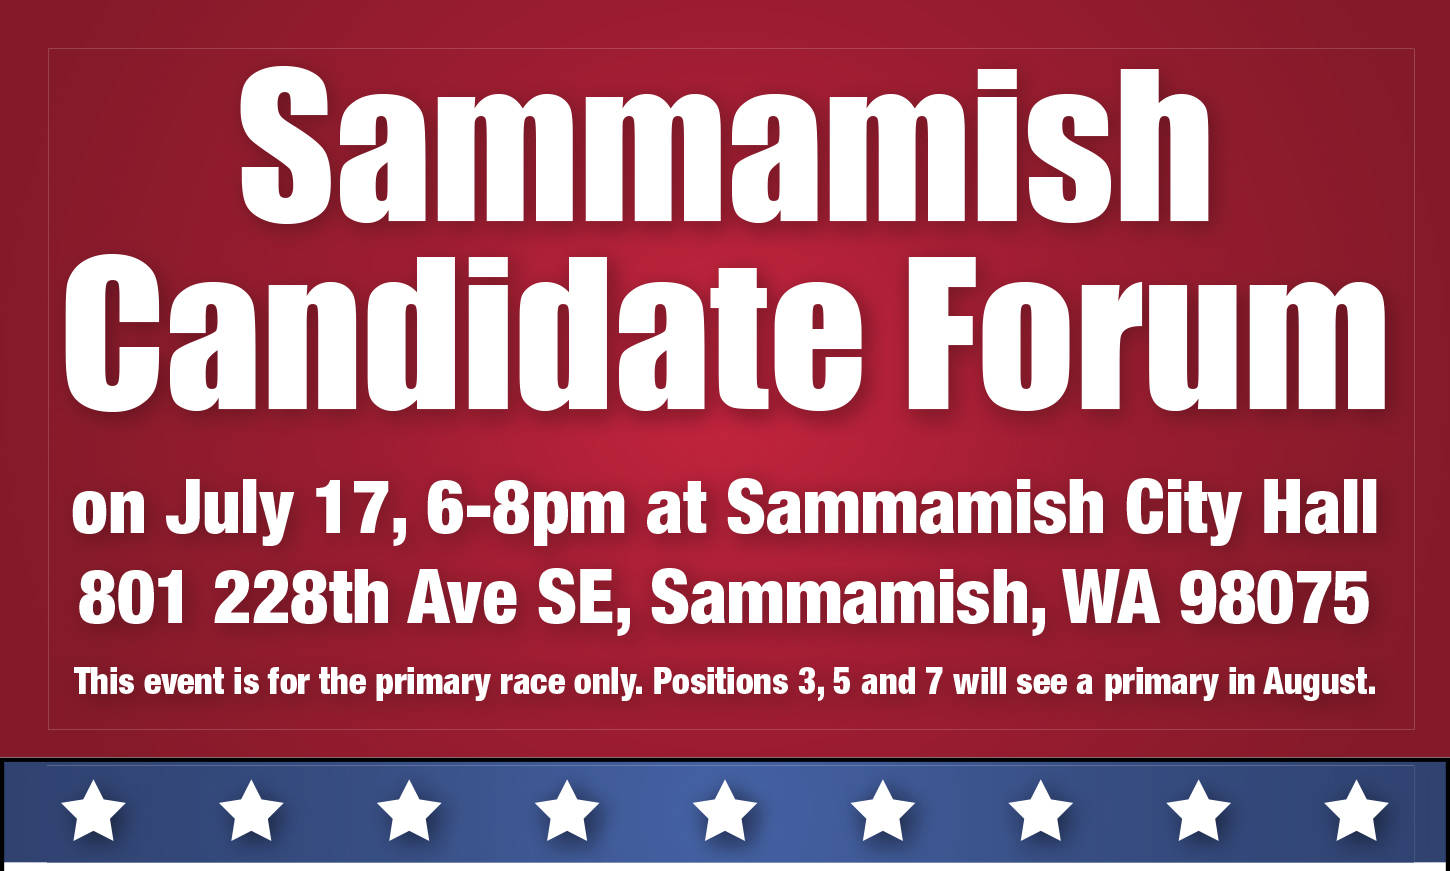 Issaquah/Sammamish Reporter to moderate a Sammamish Candidate Forum July 17